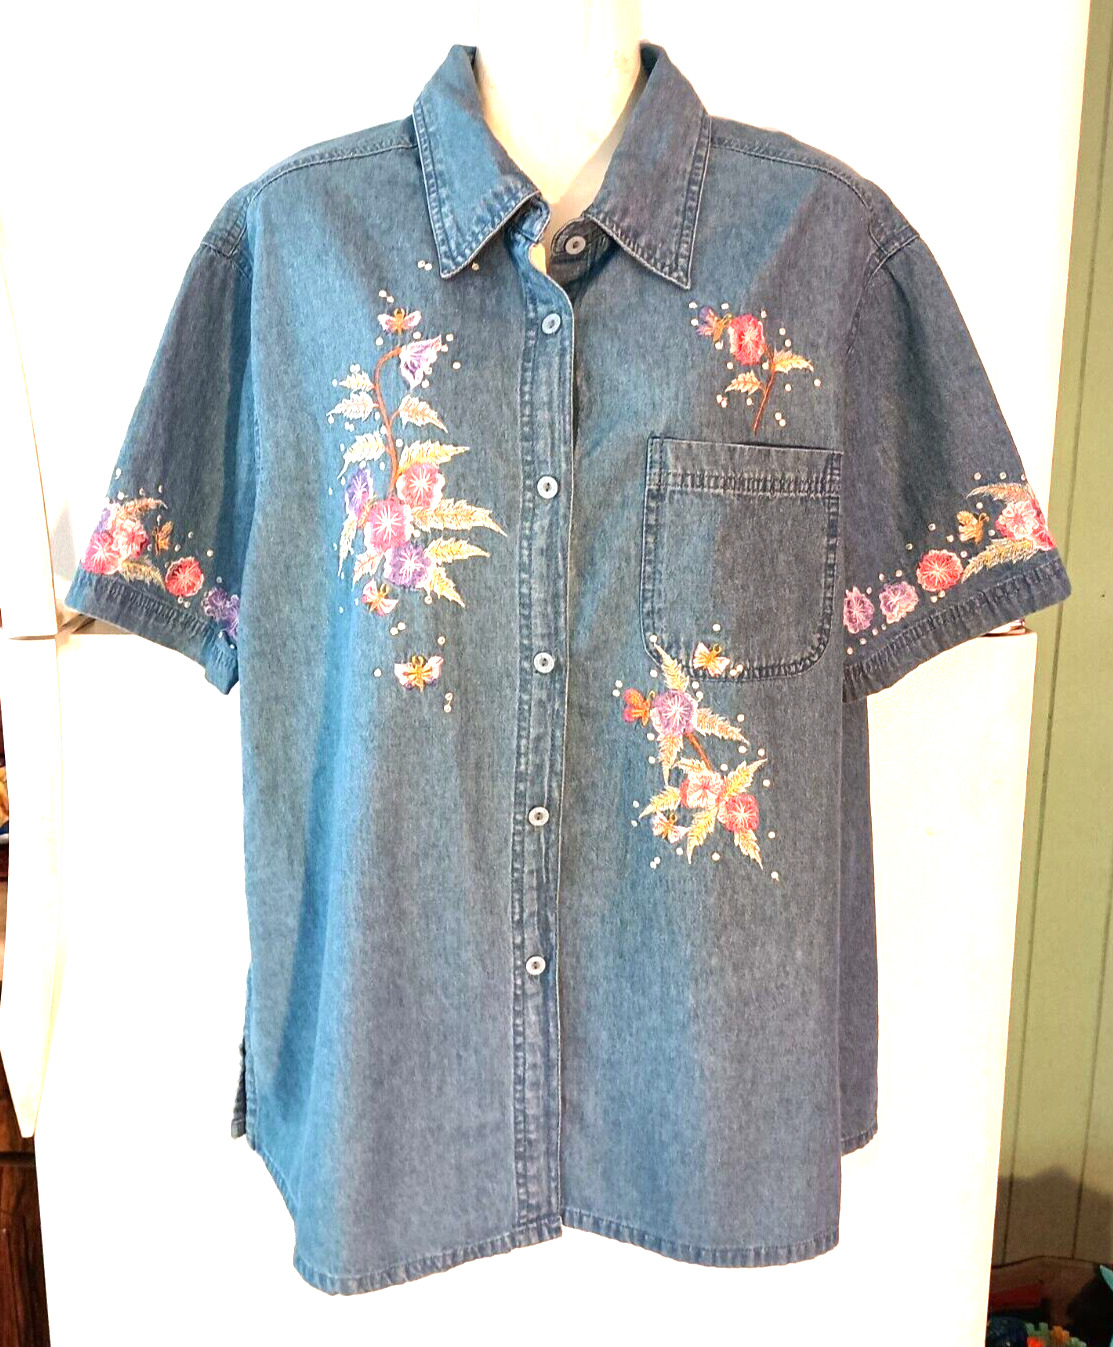 NEW PASSION-I BLUE DENIM BLOUSE WITH EMBROIDERED FLOWERS & BUTTERFLIES SIZE XL